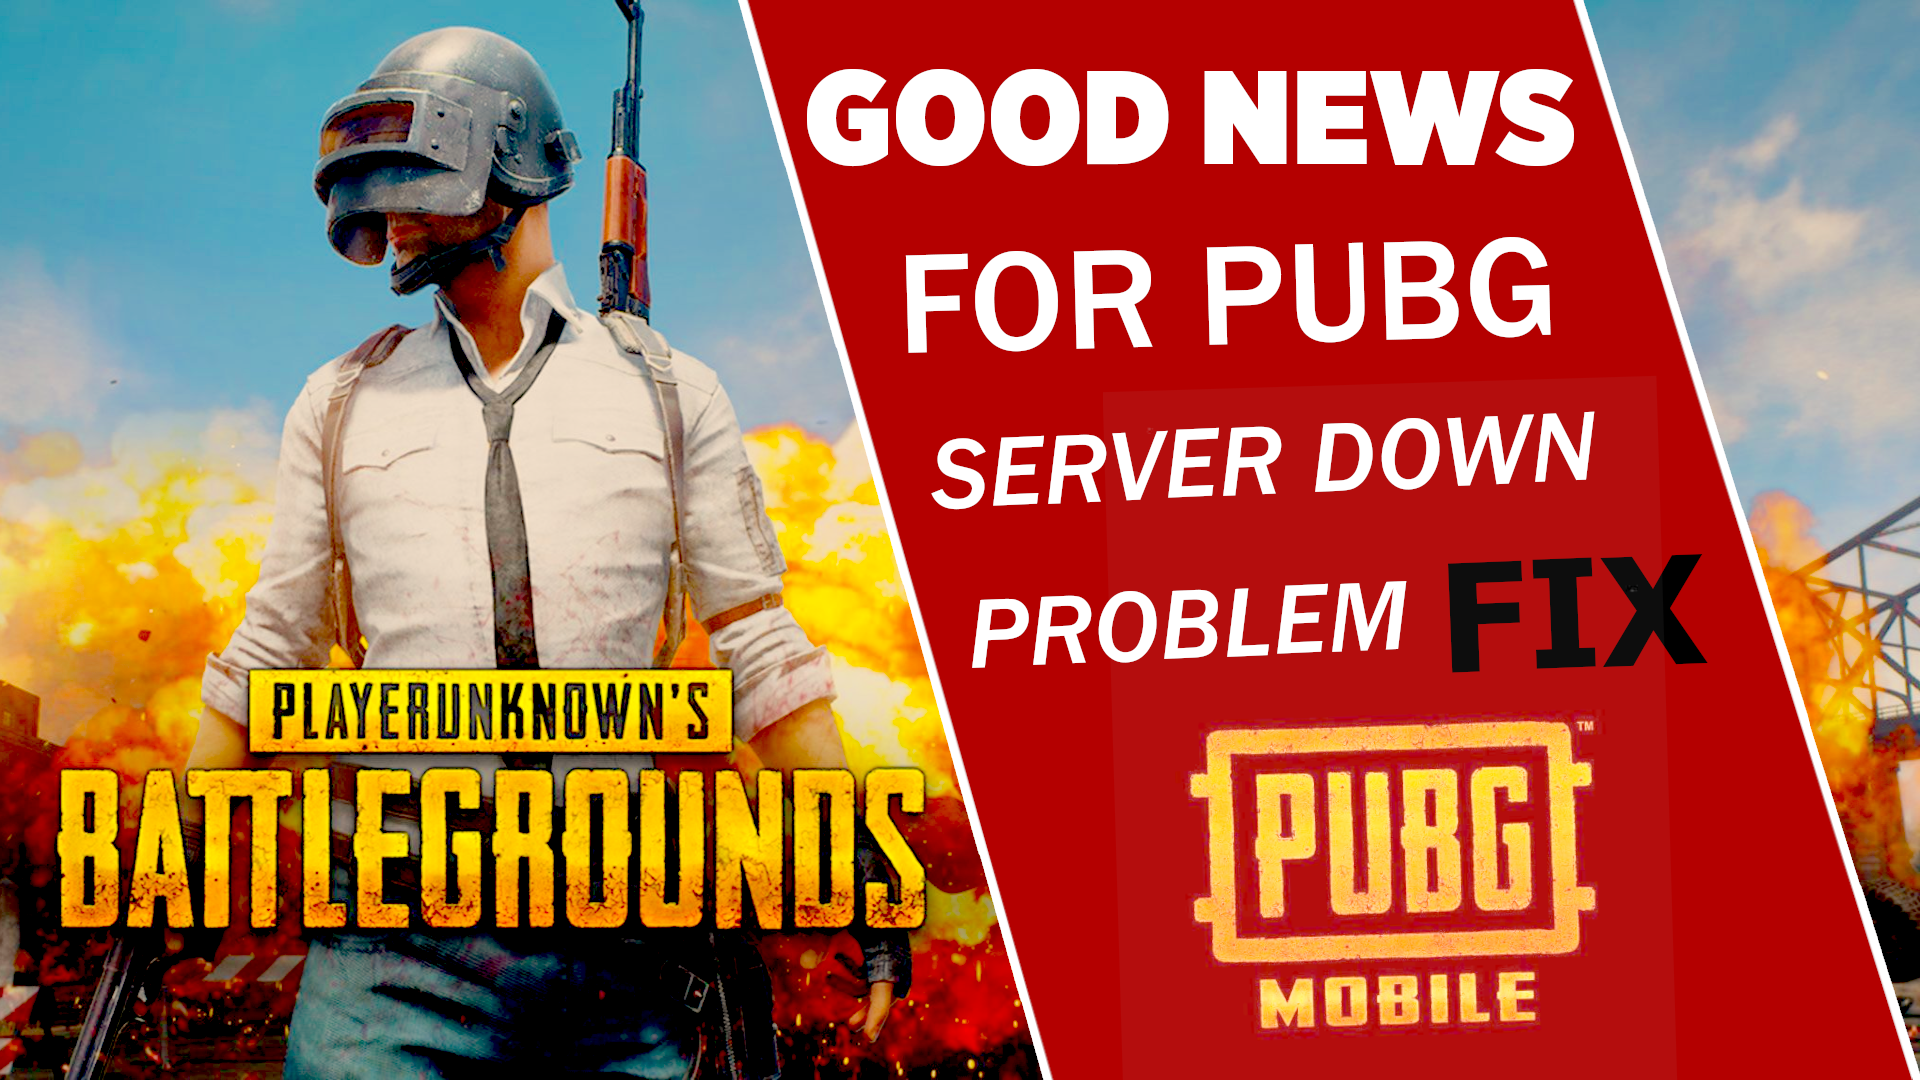 Our engineers will look into this problem pubg фото 15